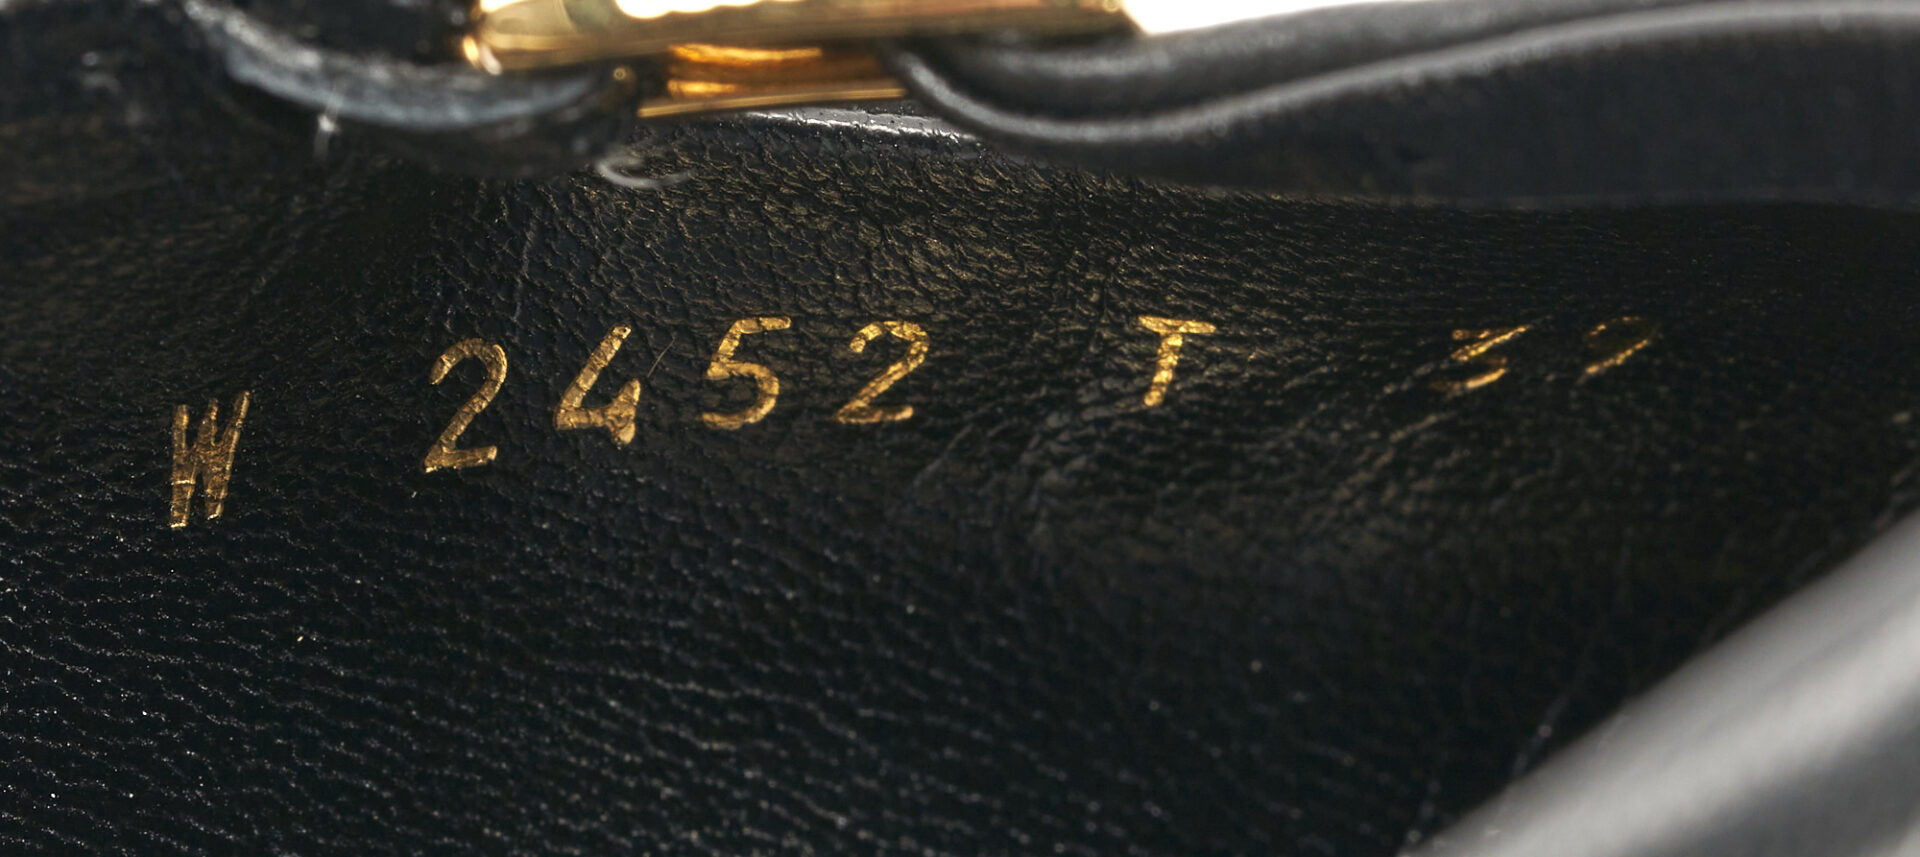 Lot 1197: 3 prs. Tom Ford Pumps, incl. Mary Jane Mules